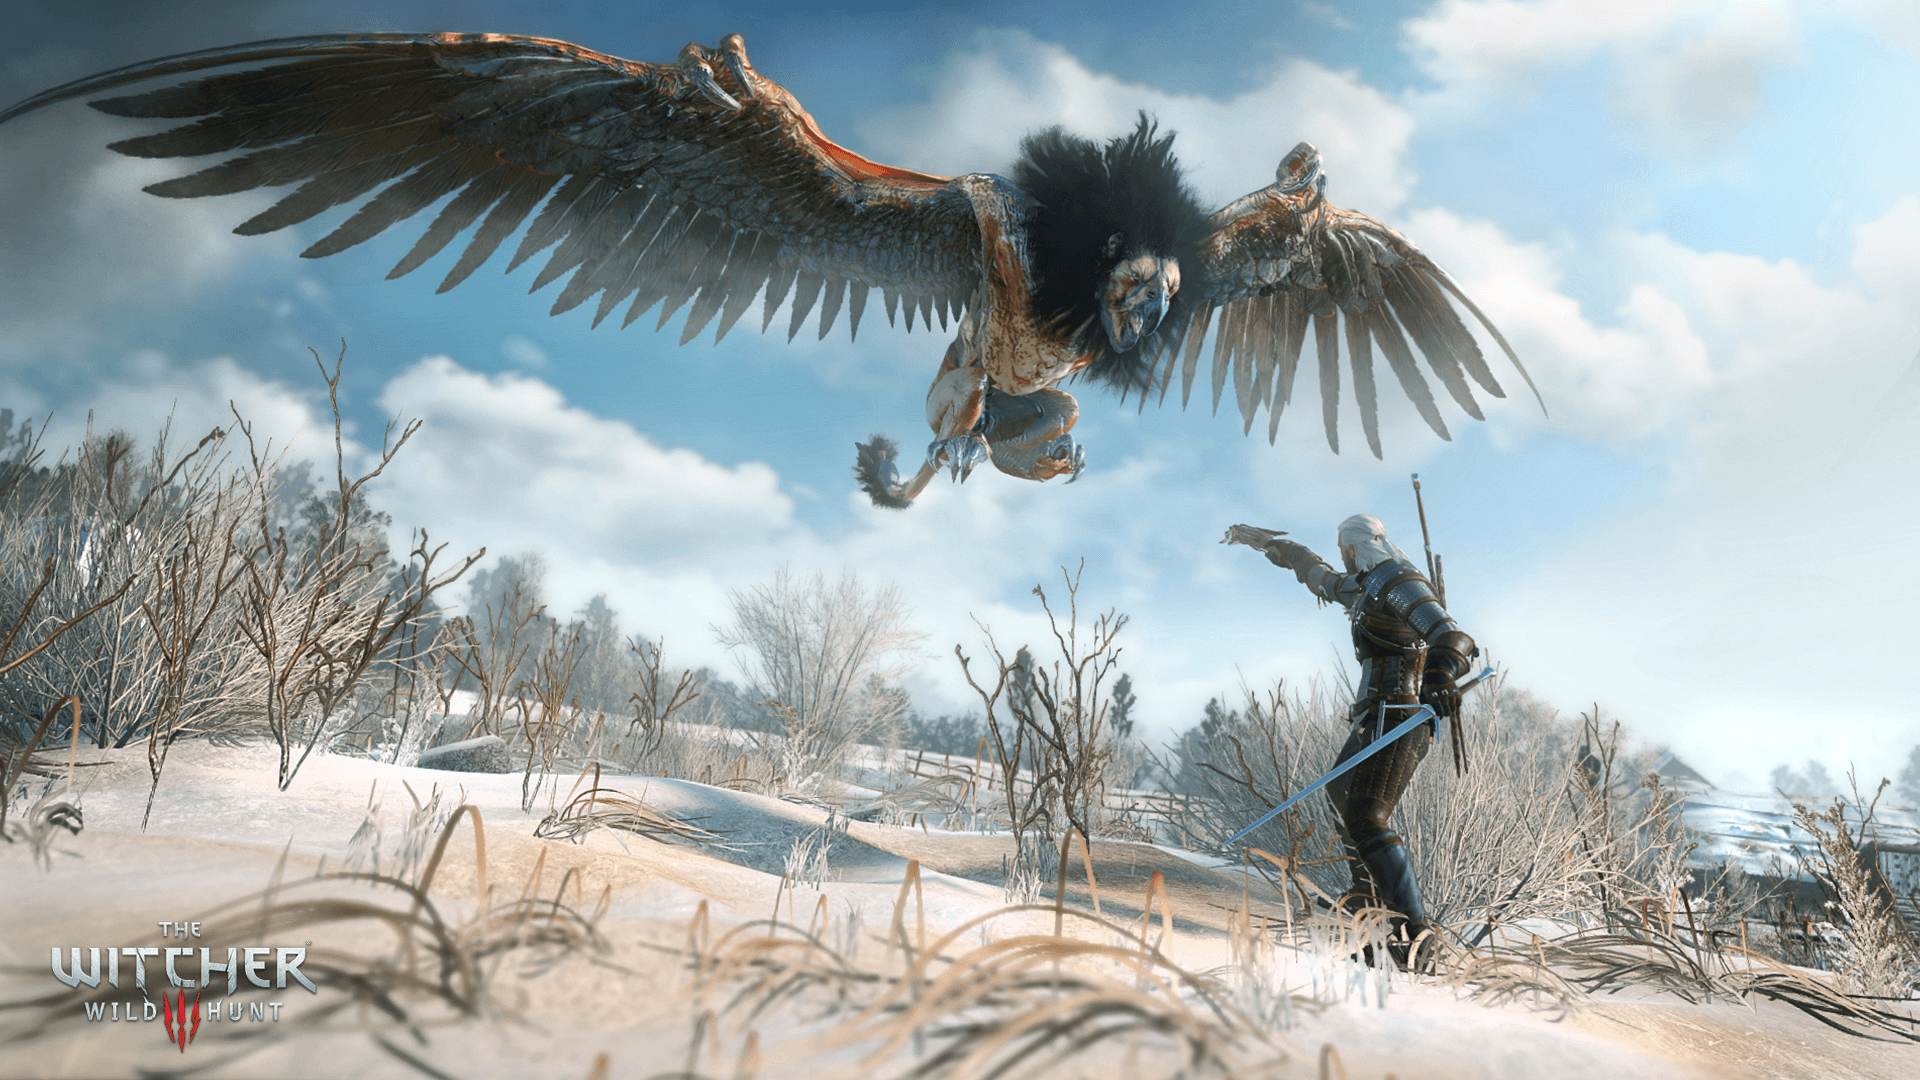 Watch Geralt Slay a Griffin in This New Witcher 3 TV Spot